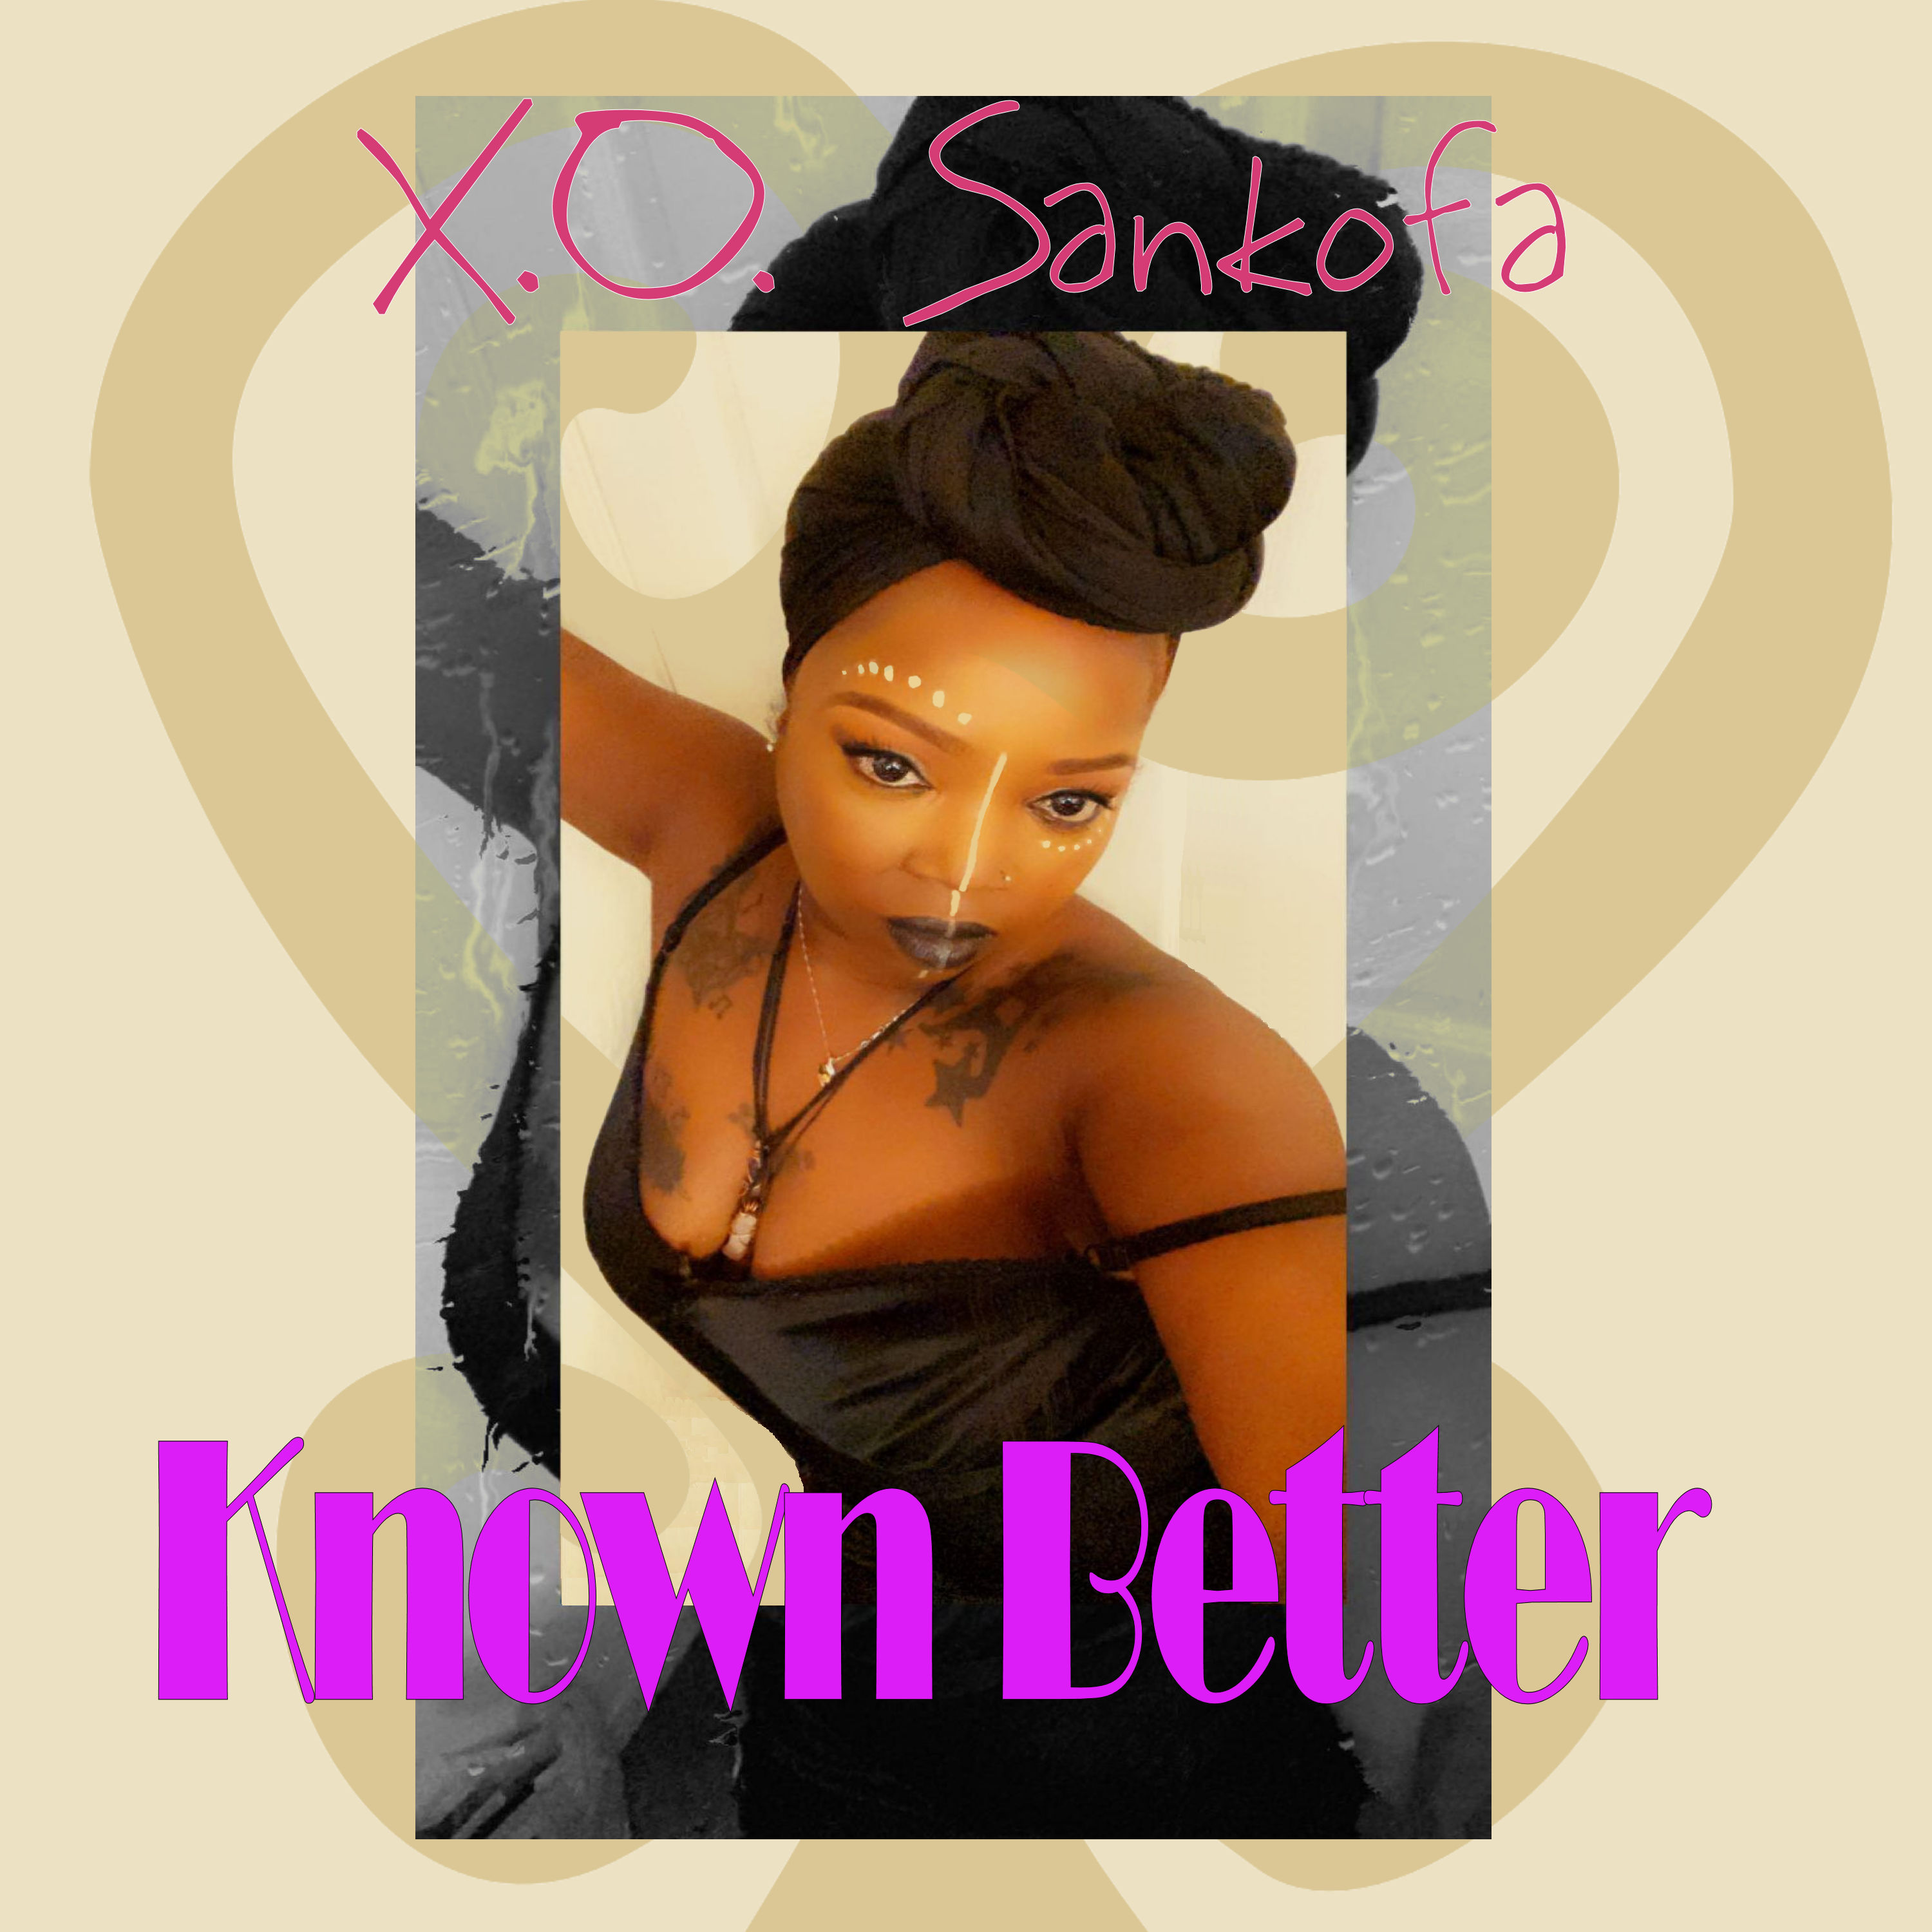 Art for Known Better by X.O. Sankofa